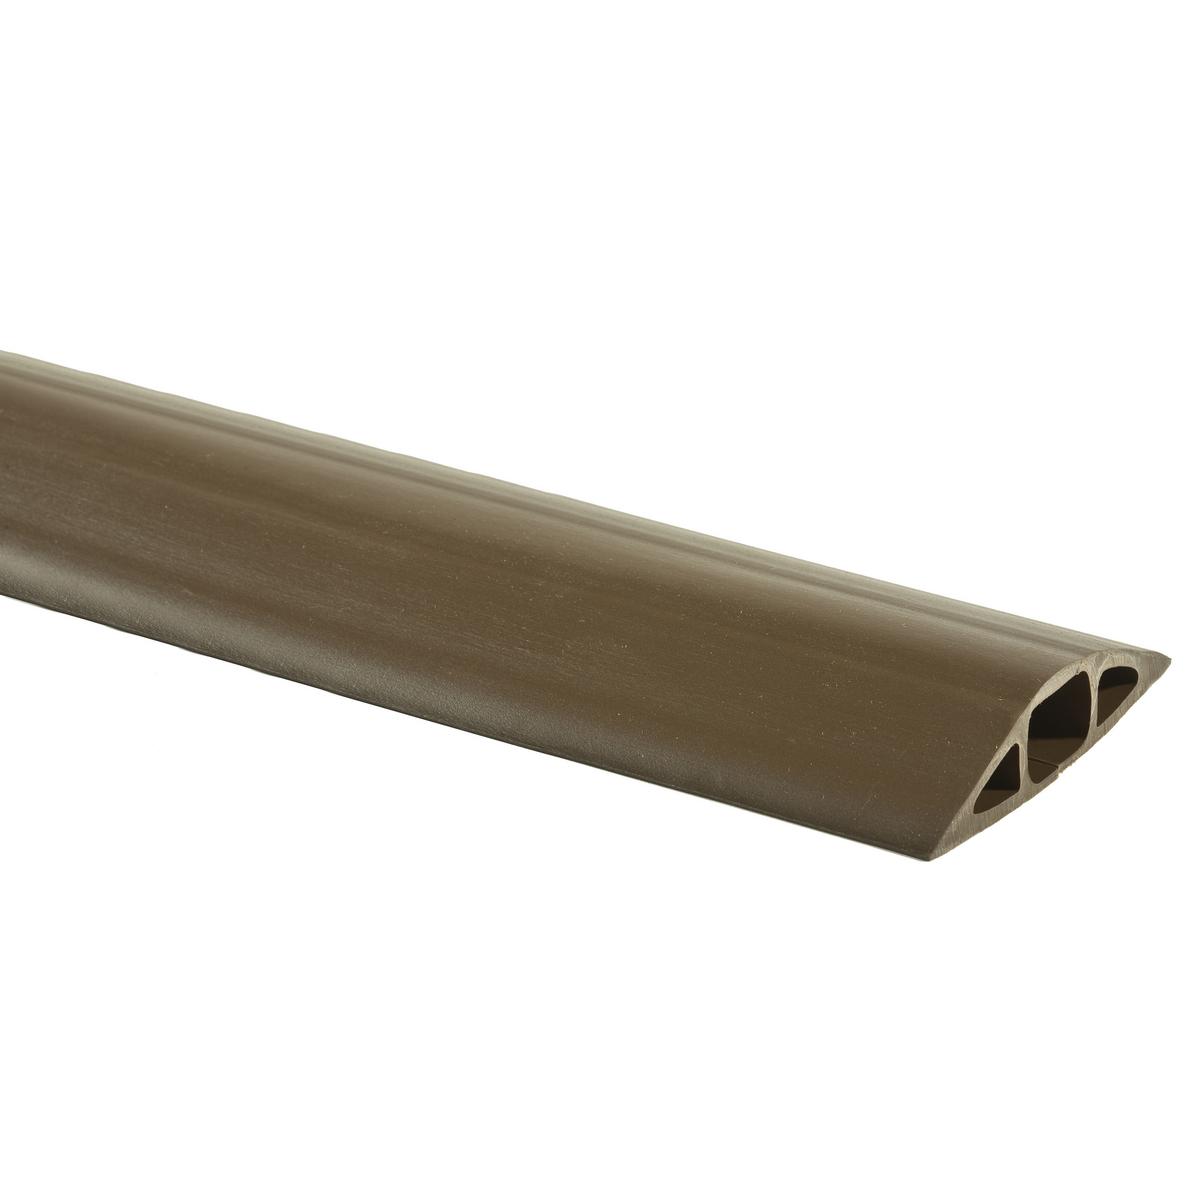 Hubbell BRYFT3BR25 FloorTrak Flexible Non-Metallic Cover for Cables, Size 3, Brown, 25' 